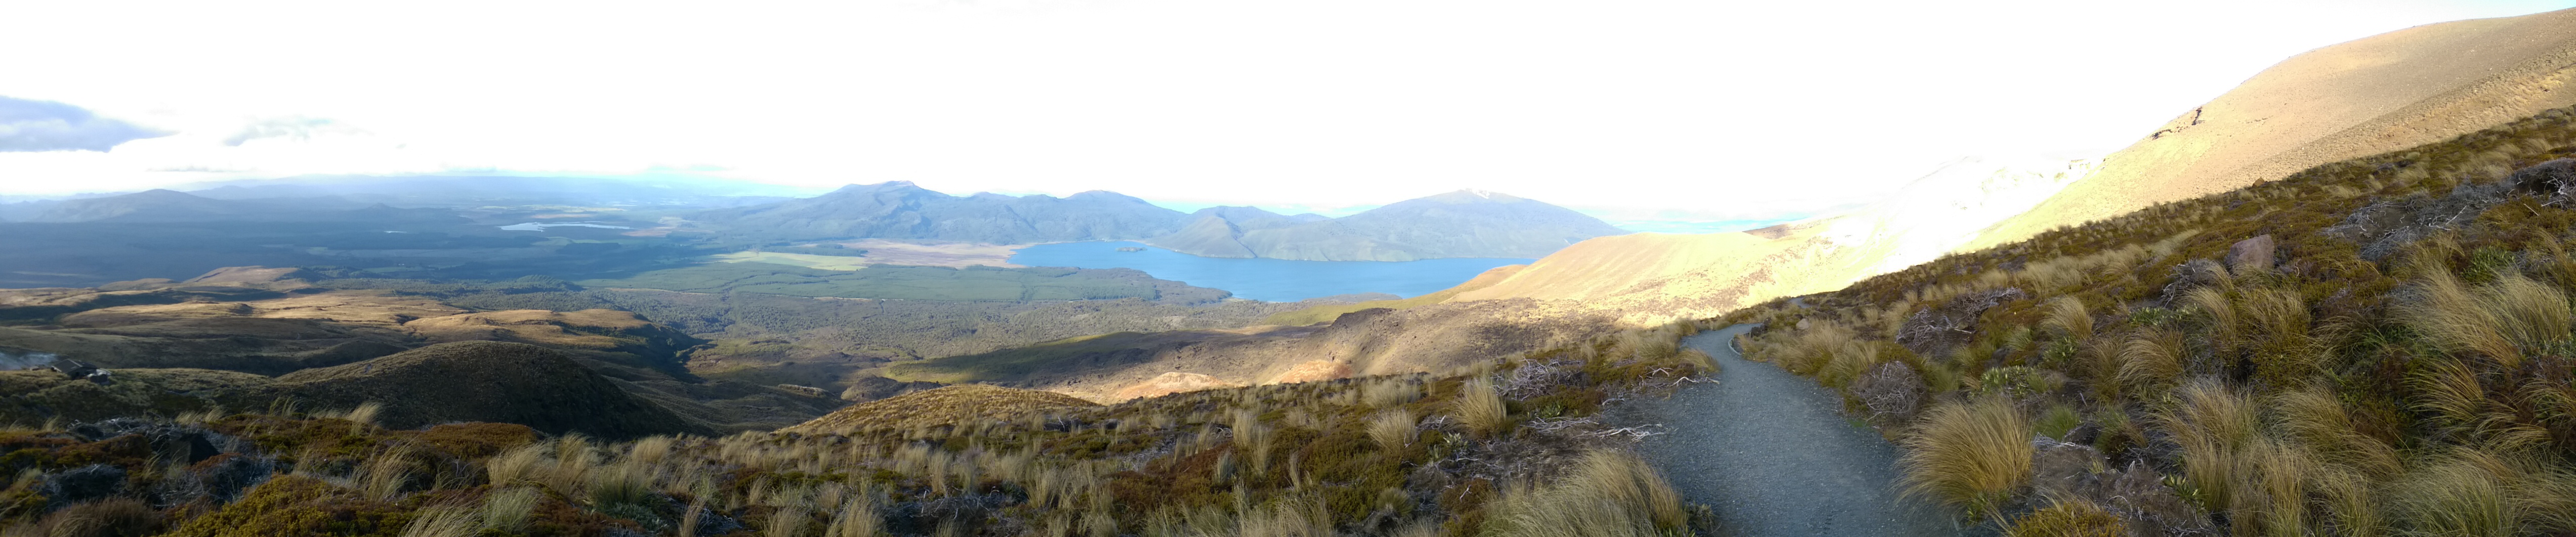 Backpacking with Bacon | Hiking Travel Blog | NZ